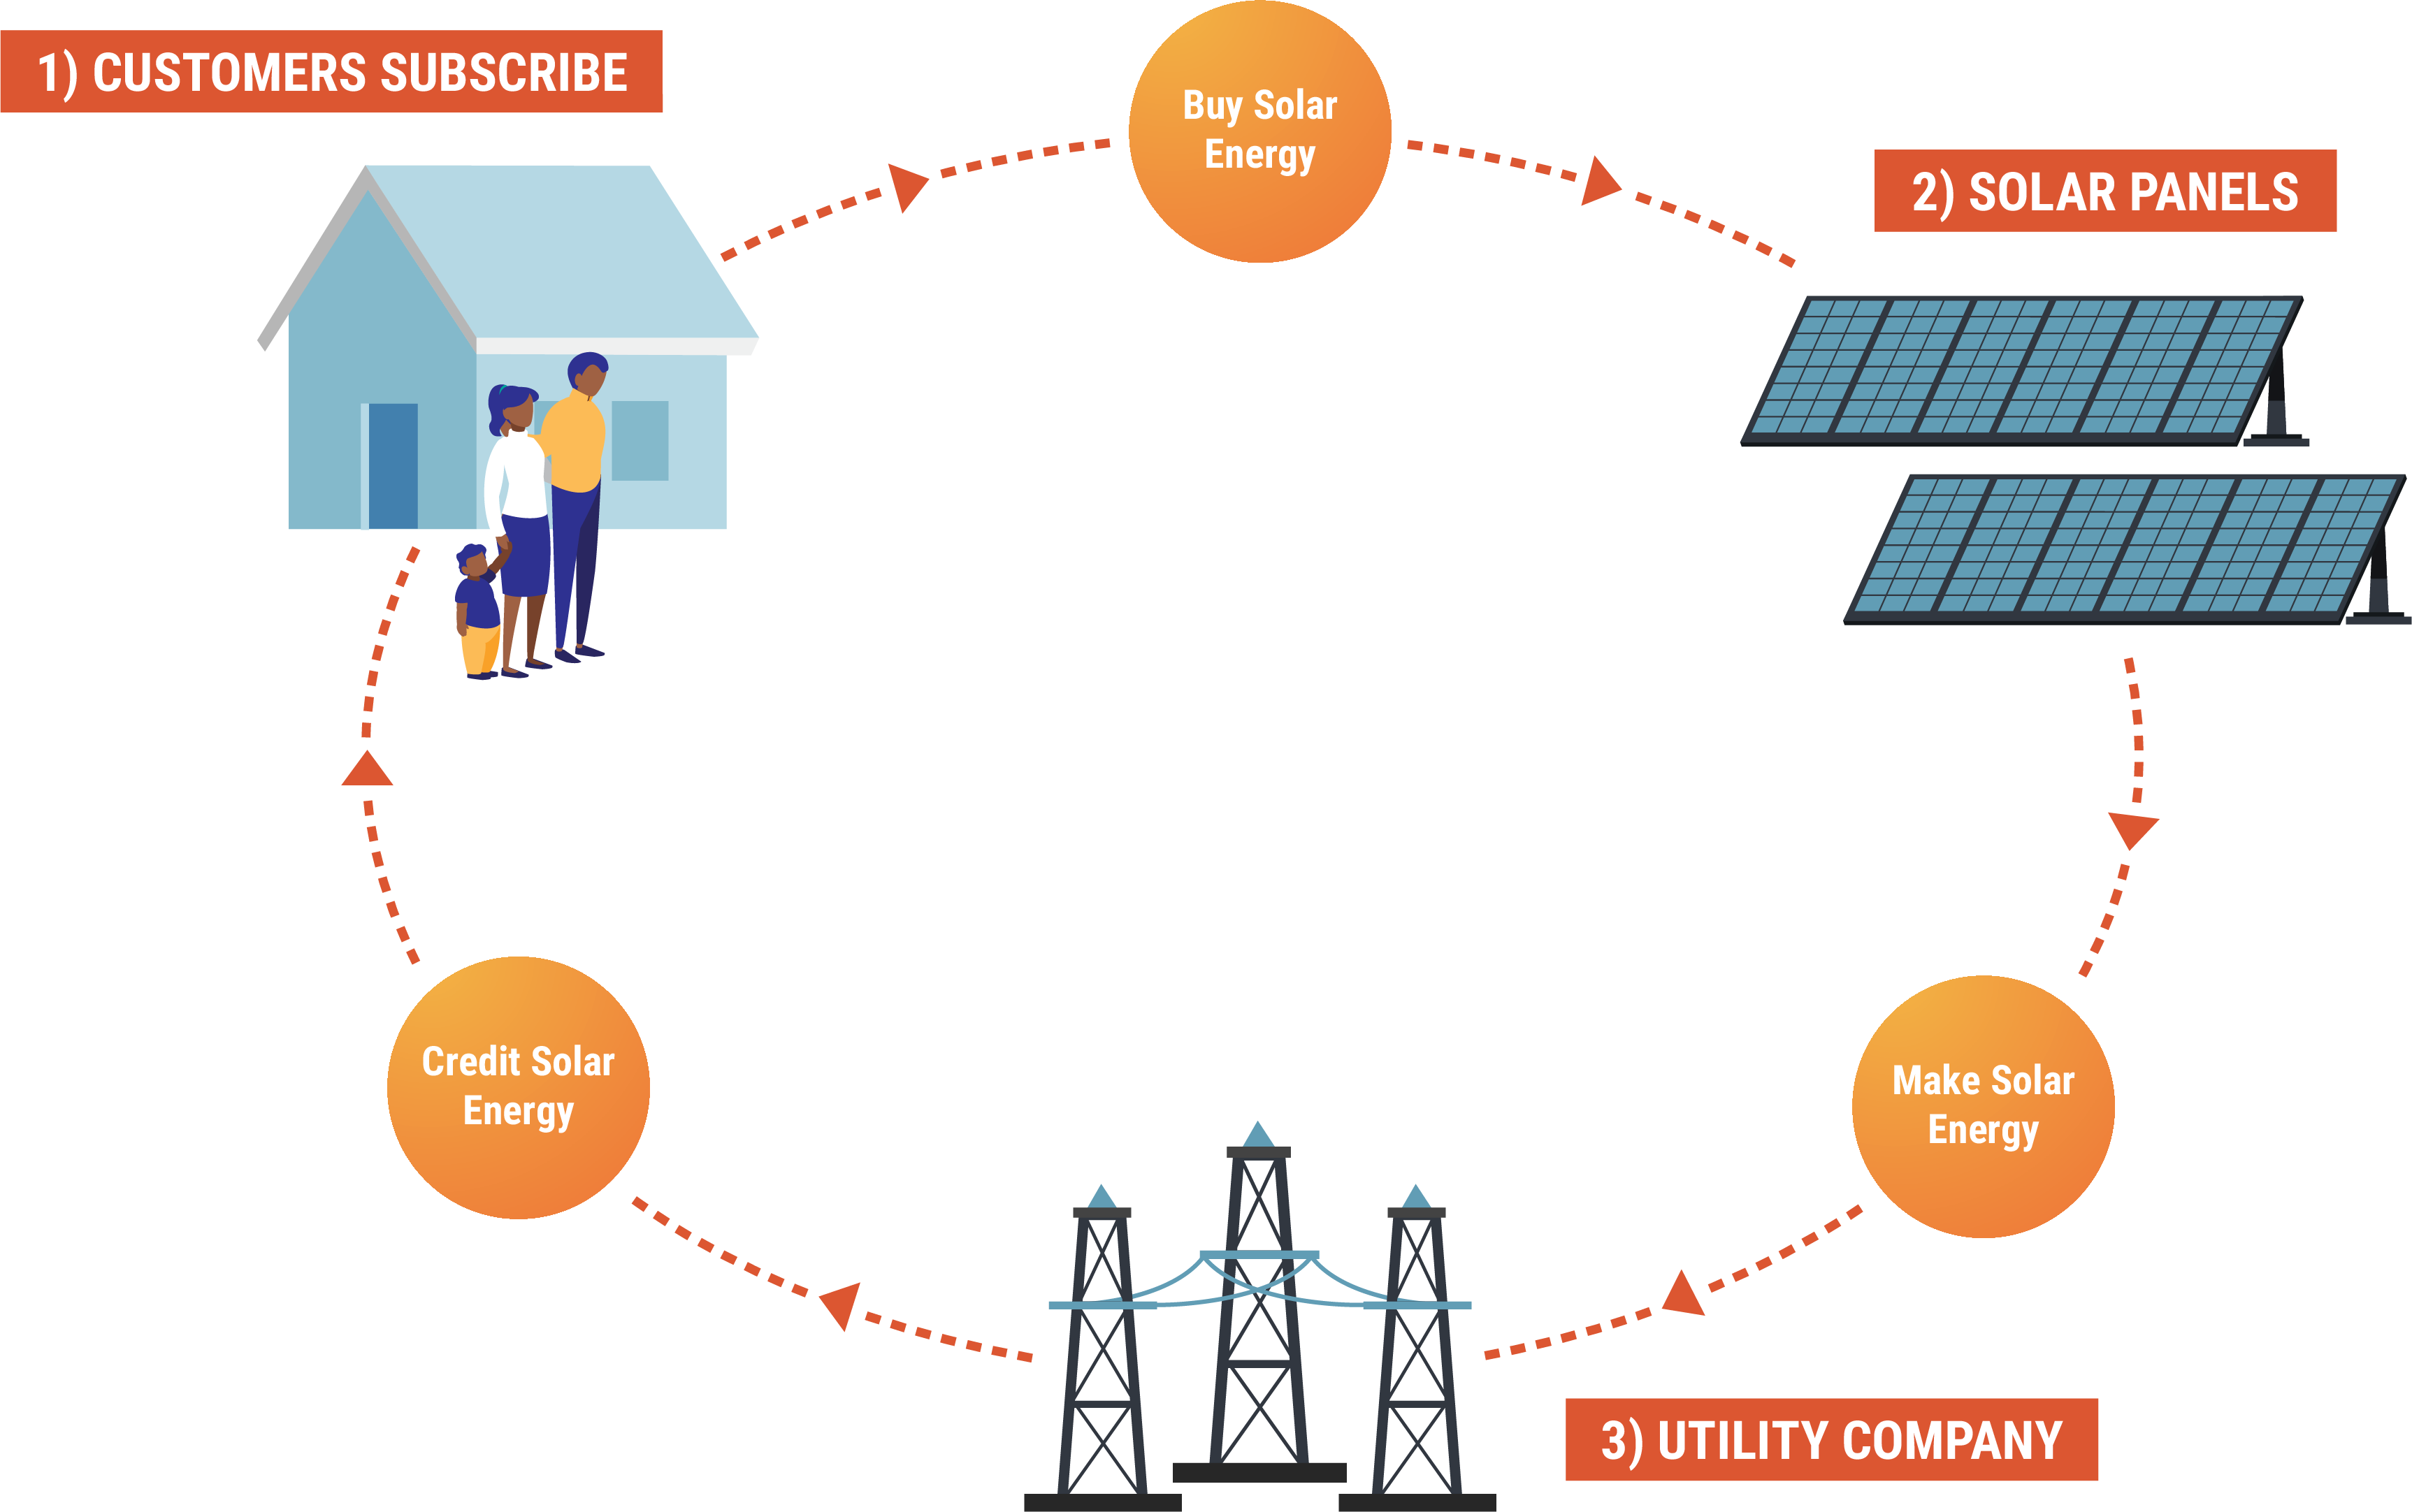 Graphic showing the three steps of community solar: 1) customers subscribe, 2) solar panels, 3) utility company